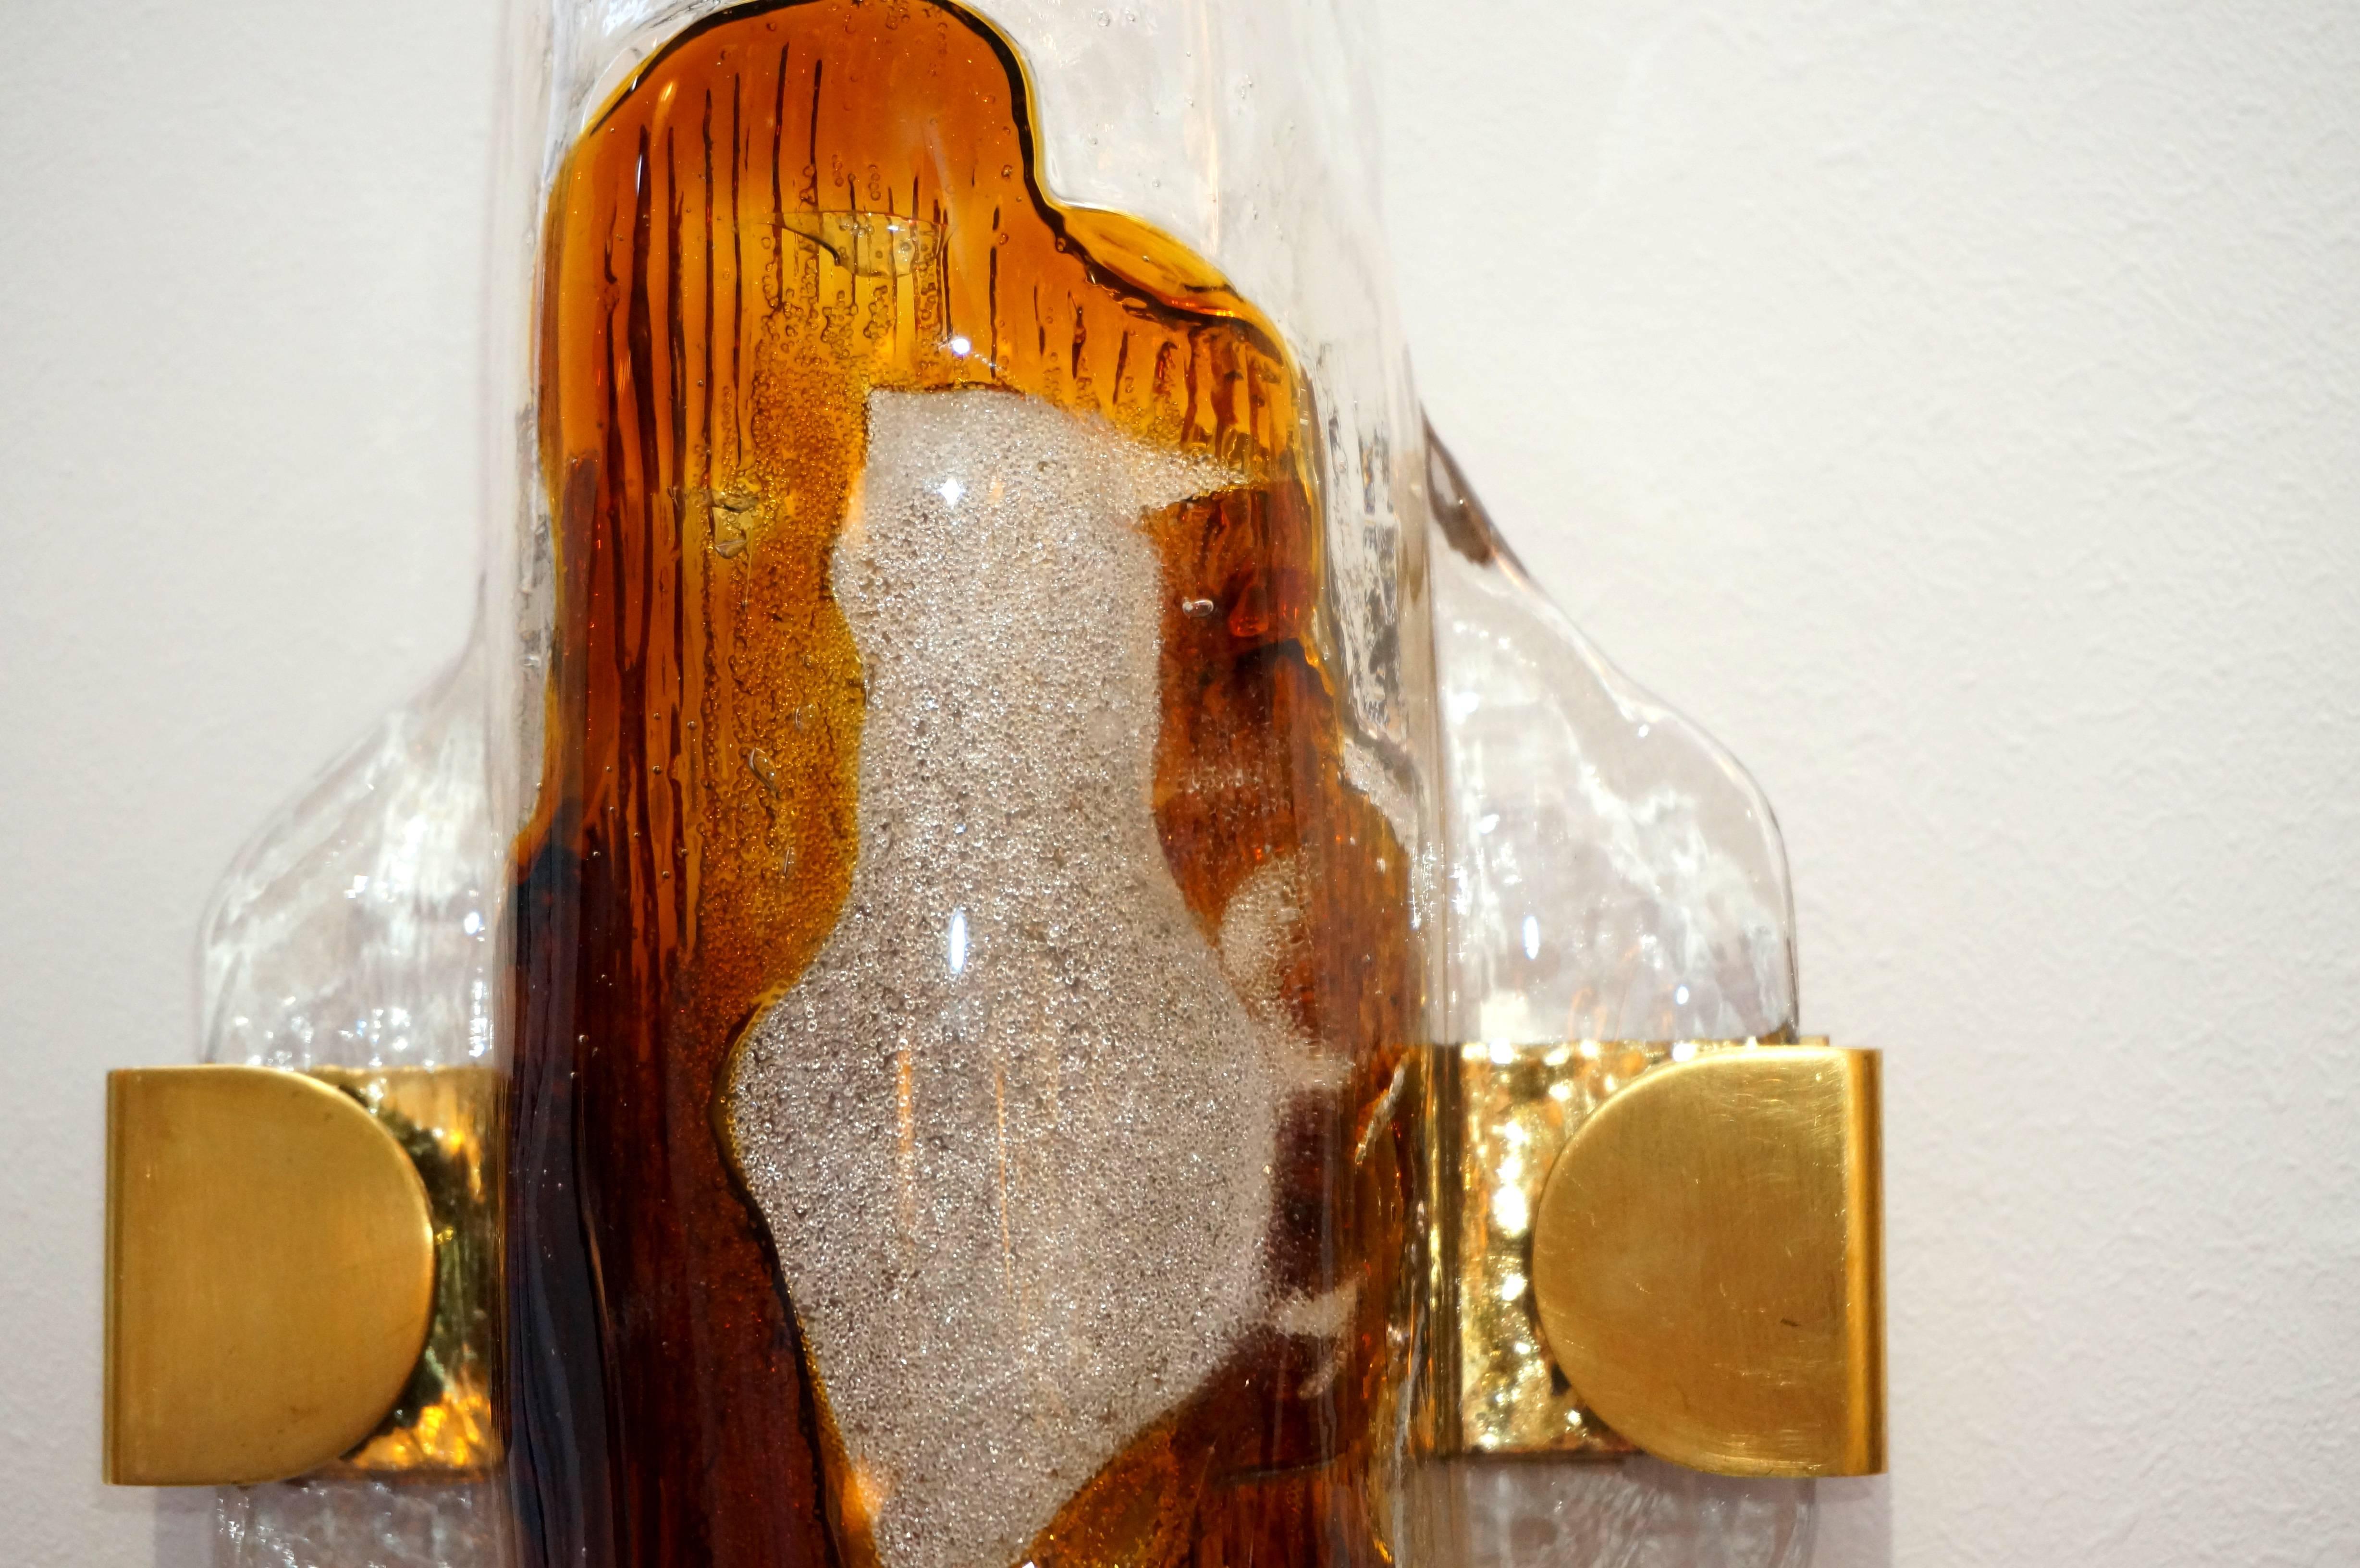 This pair of Mid-Century Modern wall sconces were created in the 1960s by the iconic Mazzega of Italy.

They are in Murano glass in an organic, molten form of clear and amber coloration. The hardware is a polished brass and they require one